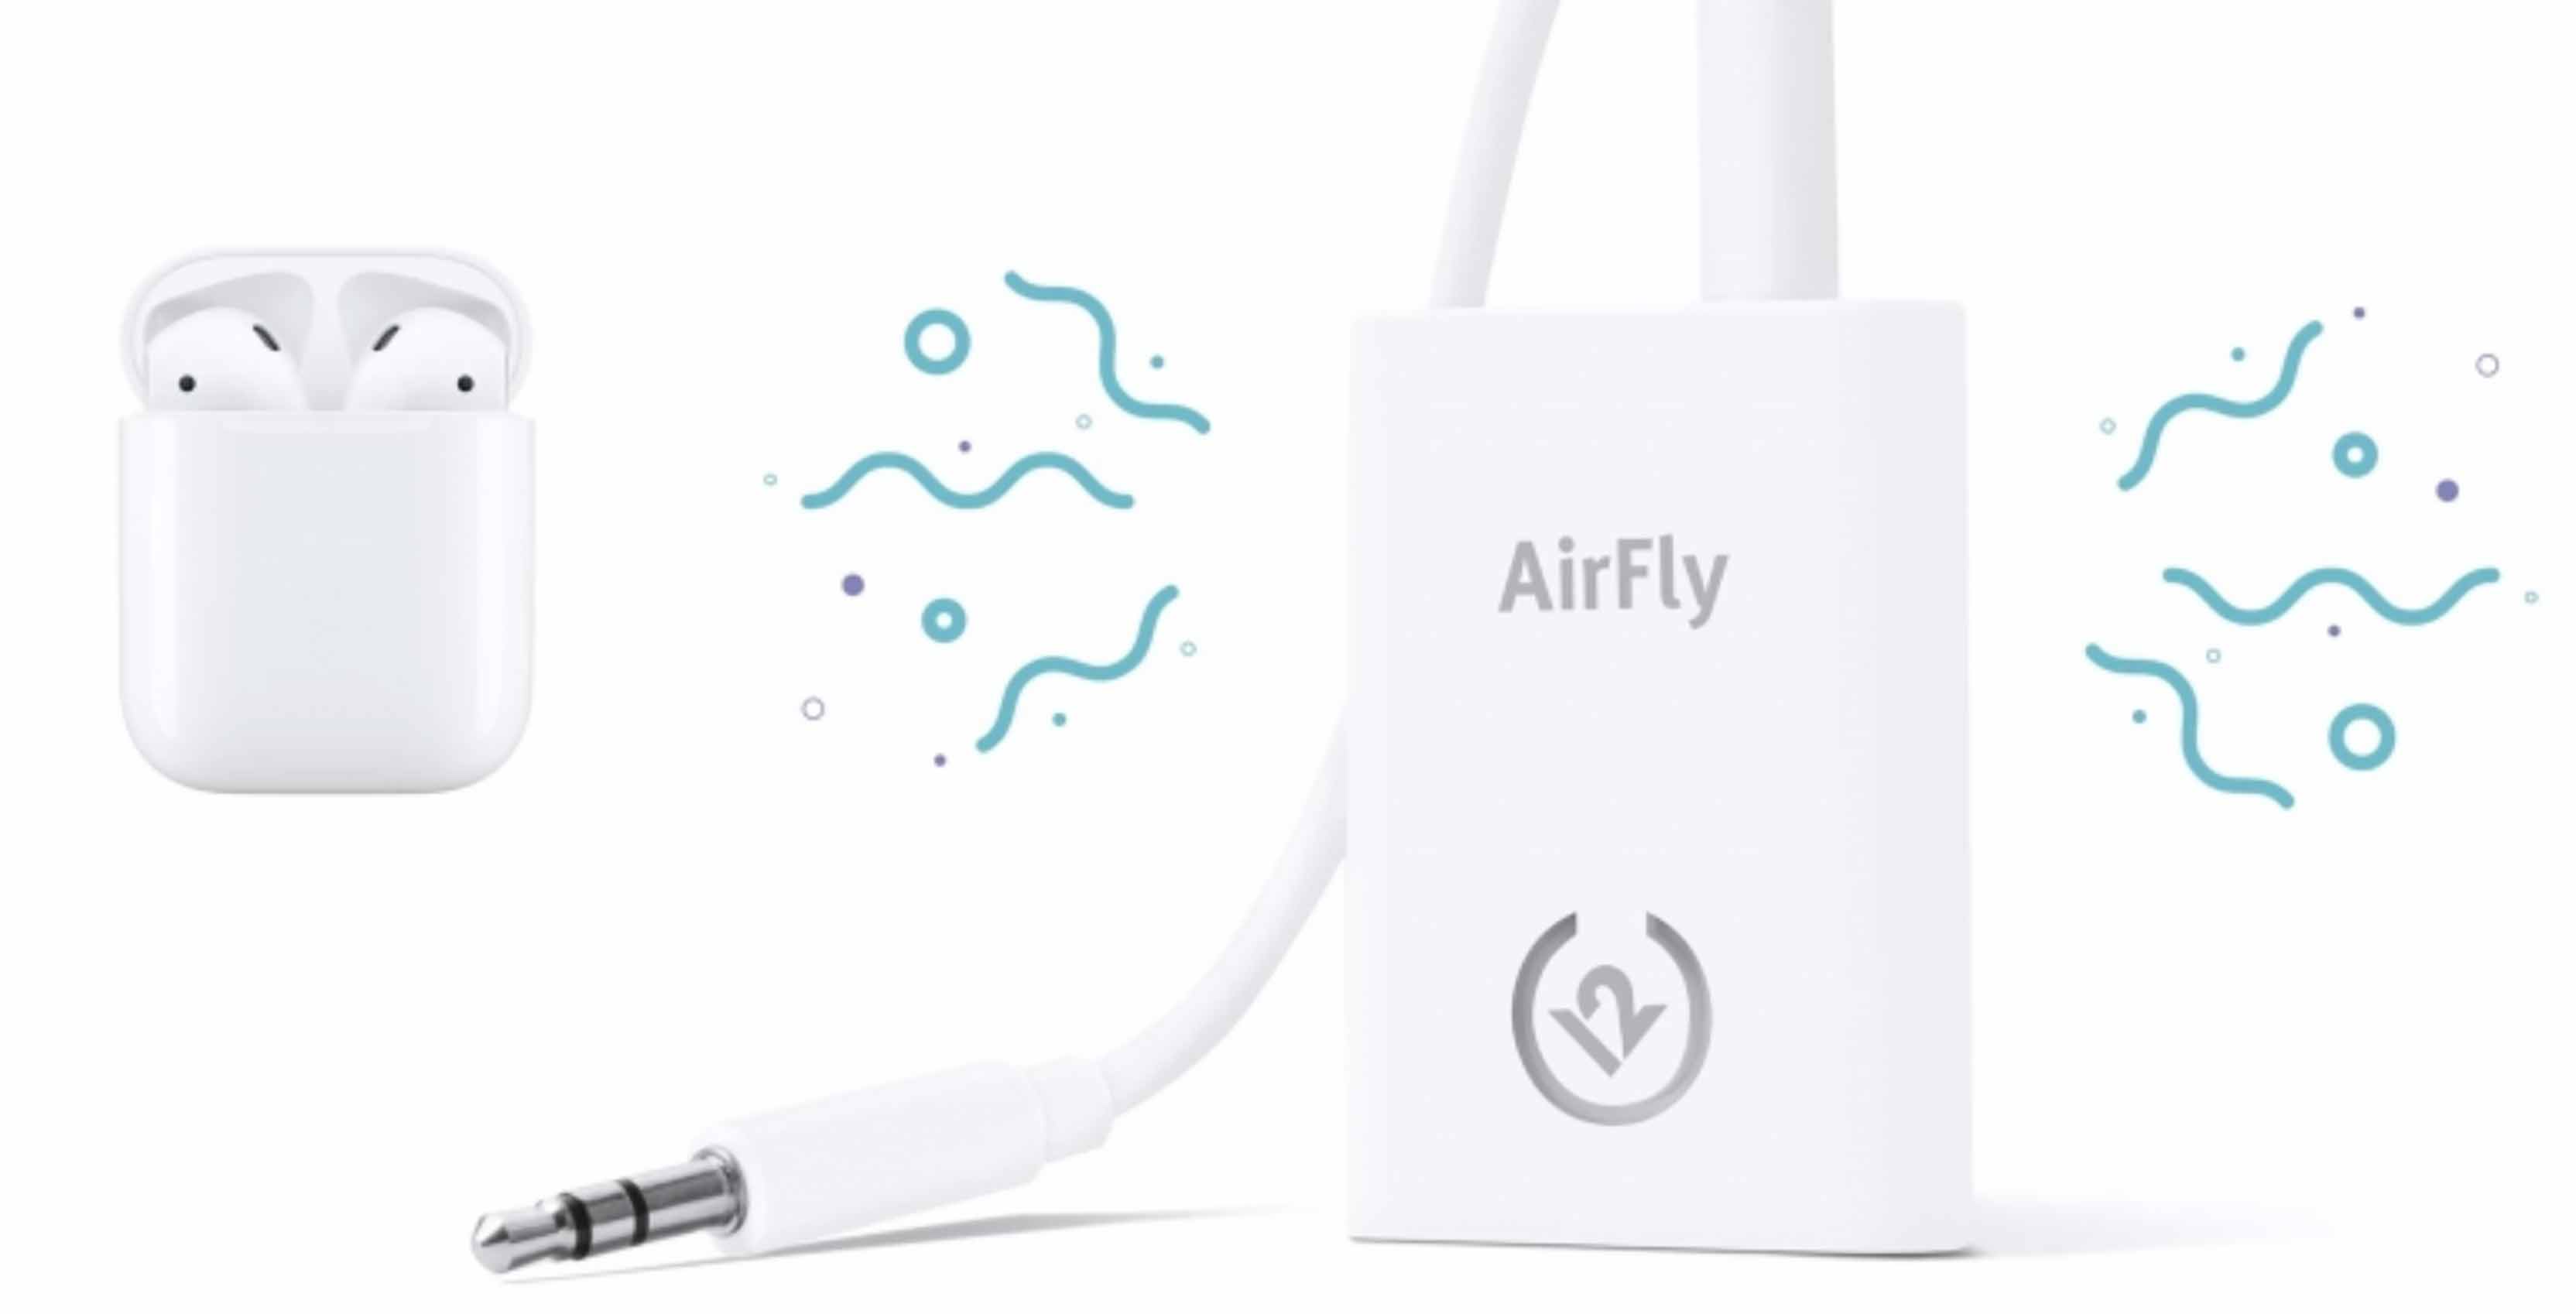 AirPod AirFly adapter